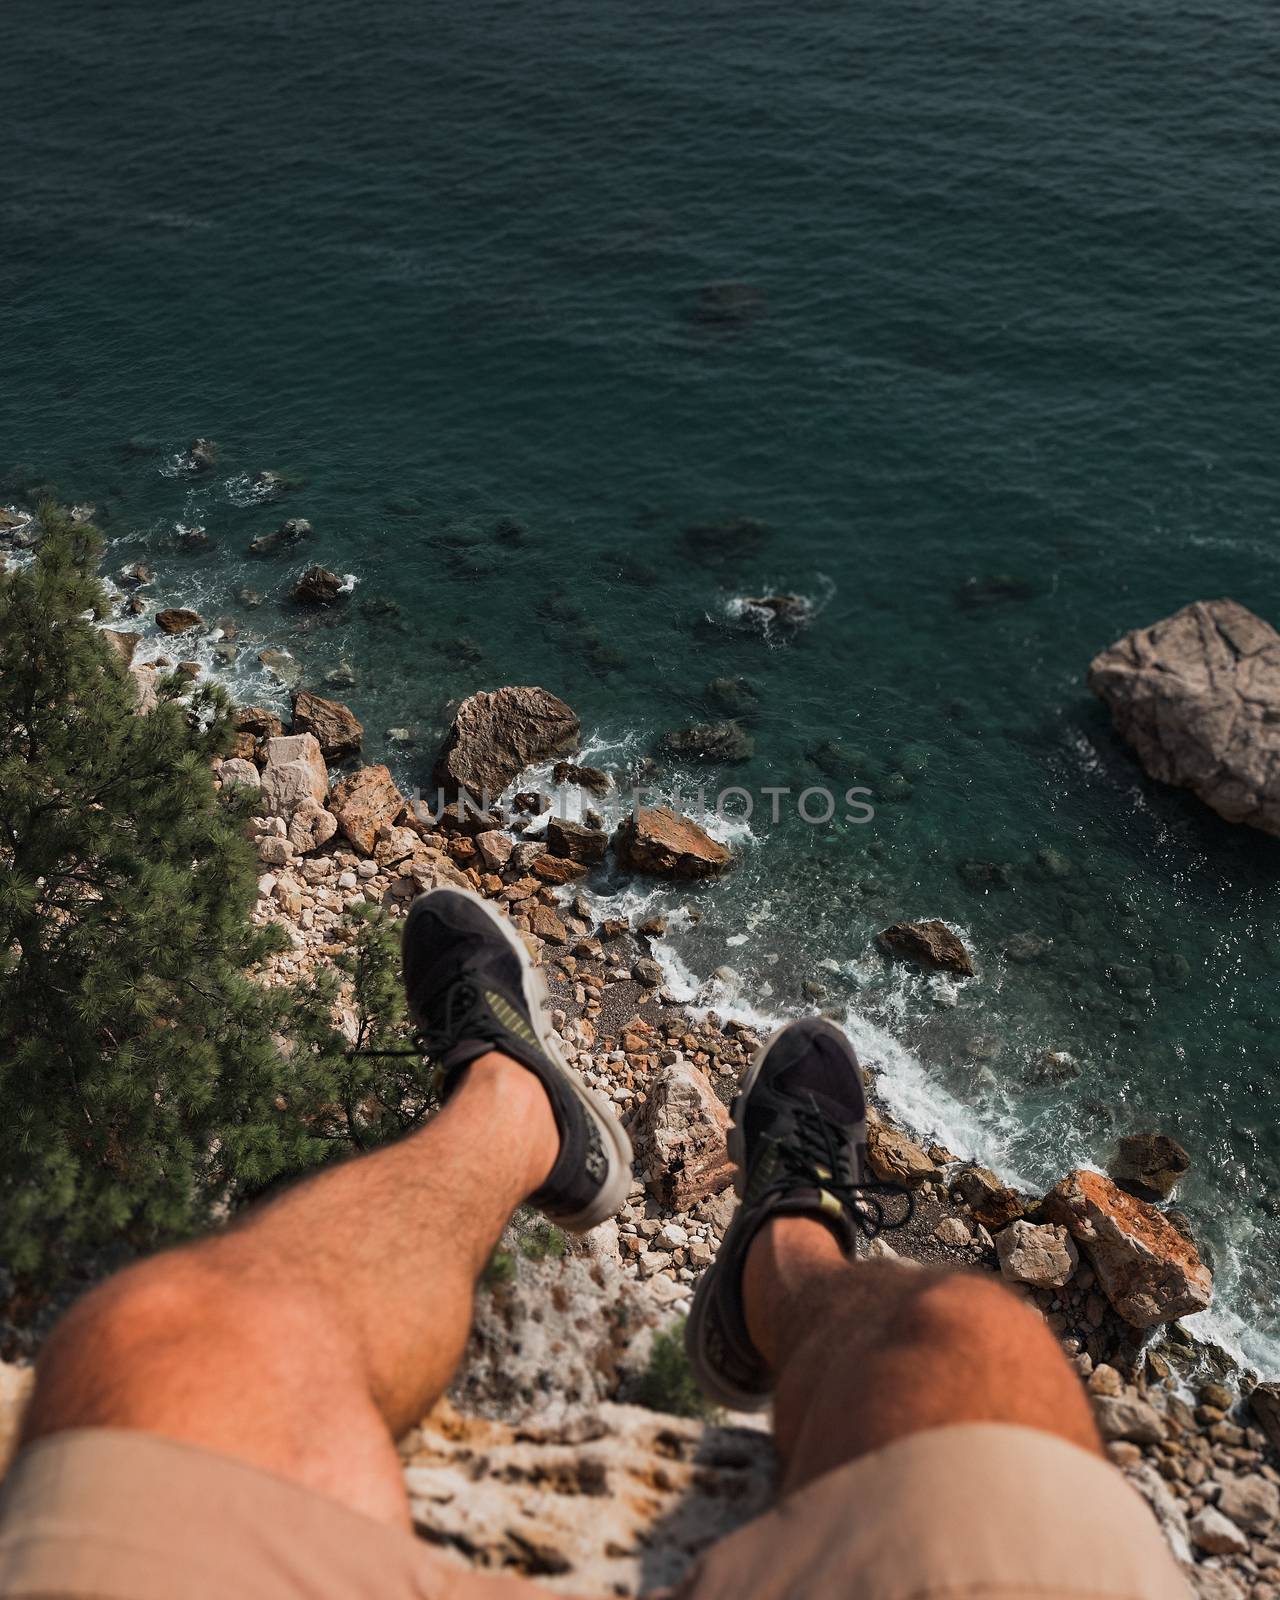 Legs of man are hanging from edge of cliff over the sea and rocks.